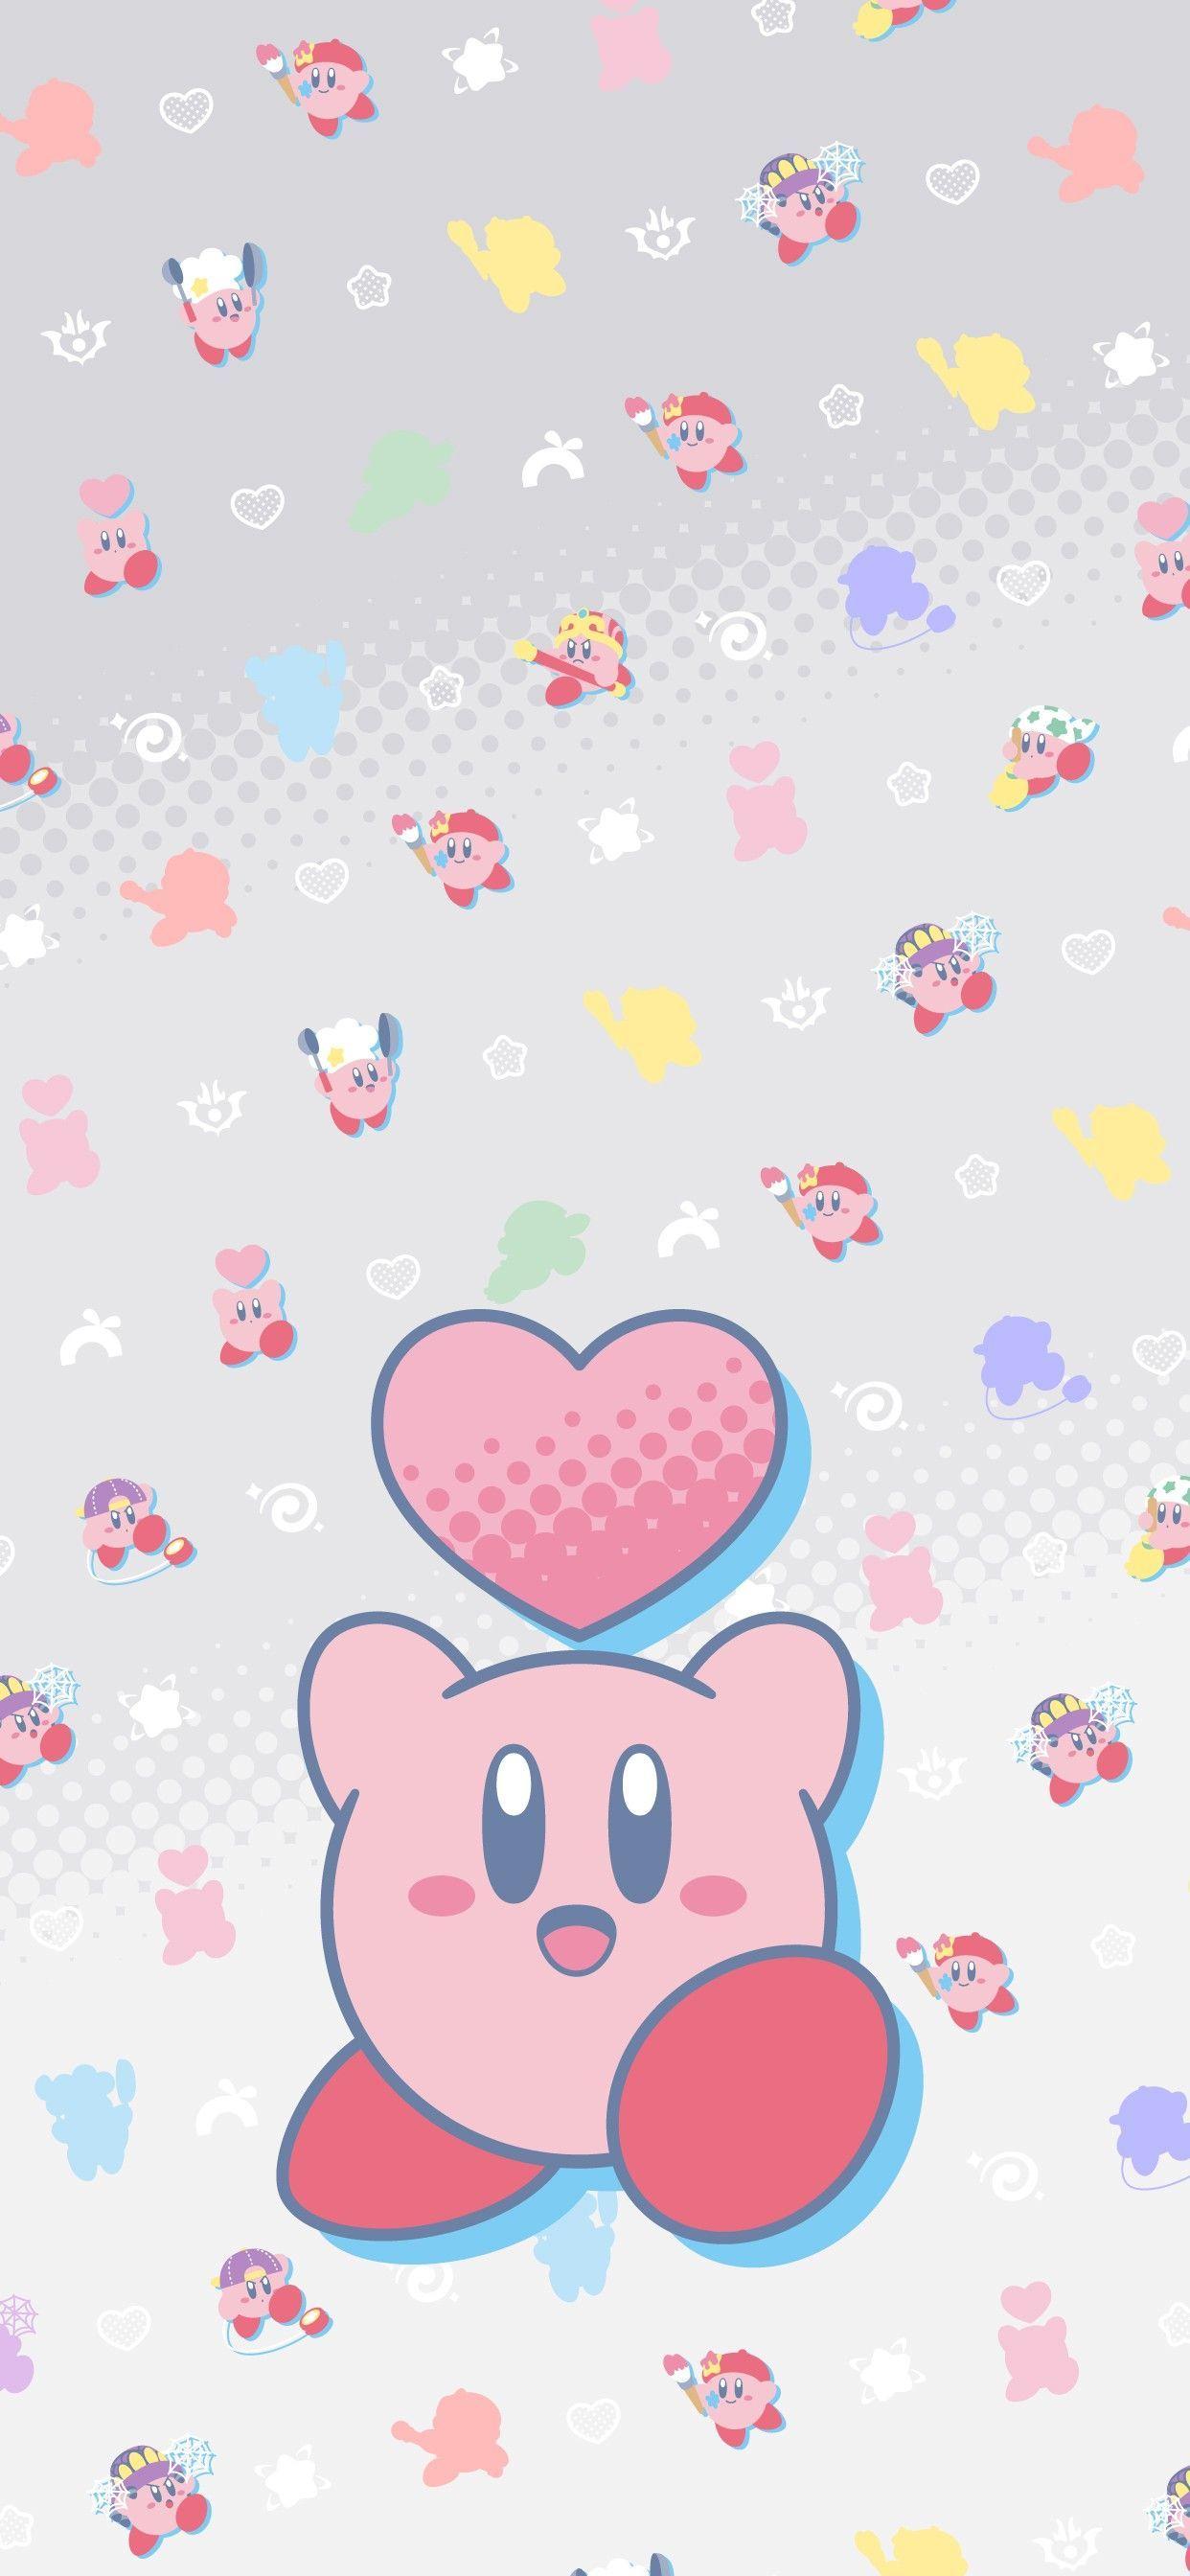 Live wallpaper kirby christmas DOWNLOAD FREE (2898176360)